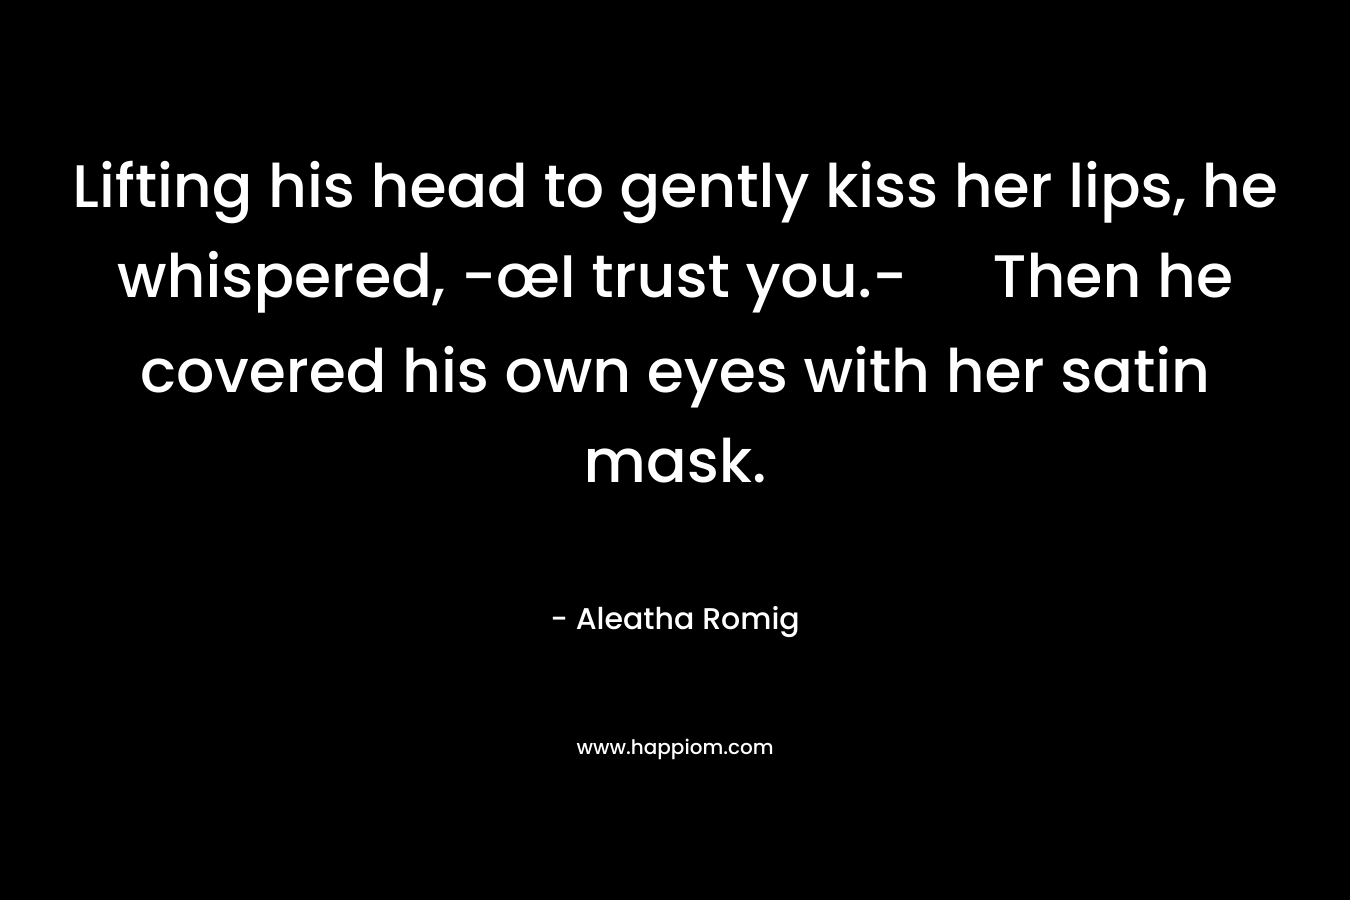 Lifting his head to gently kiss her lips, he whispered, -œI trust you.- Then he covered his own eyes with her satin mask. – Aleatha Romig